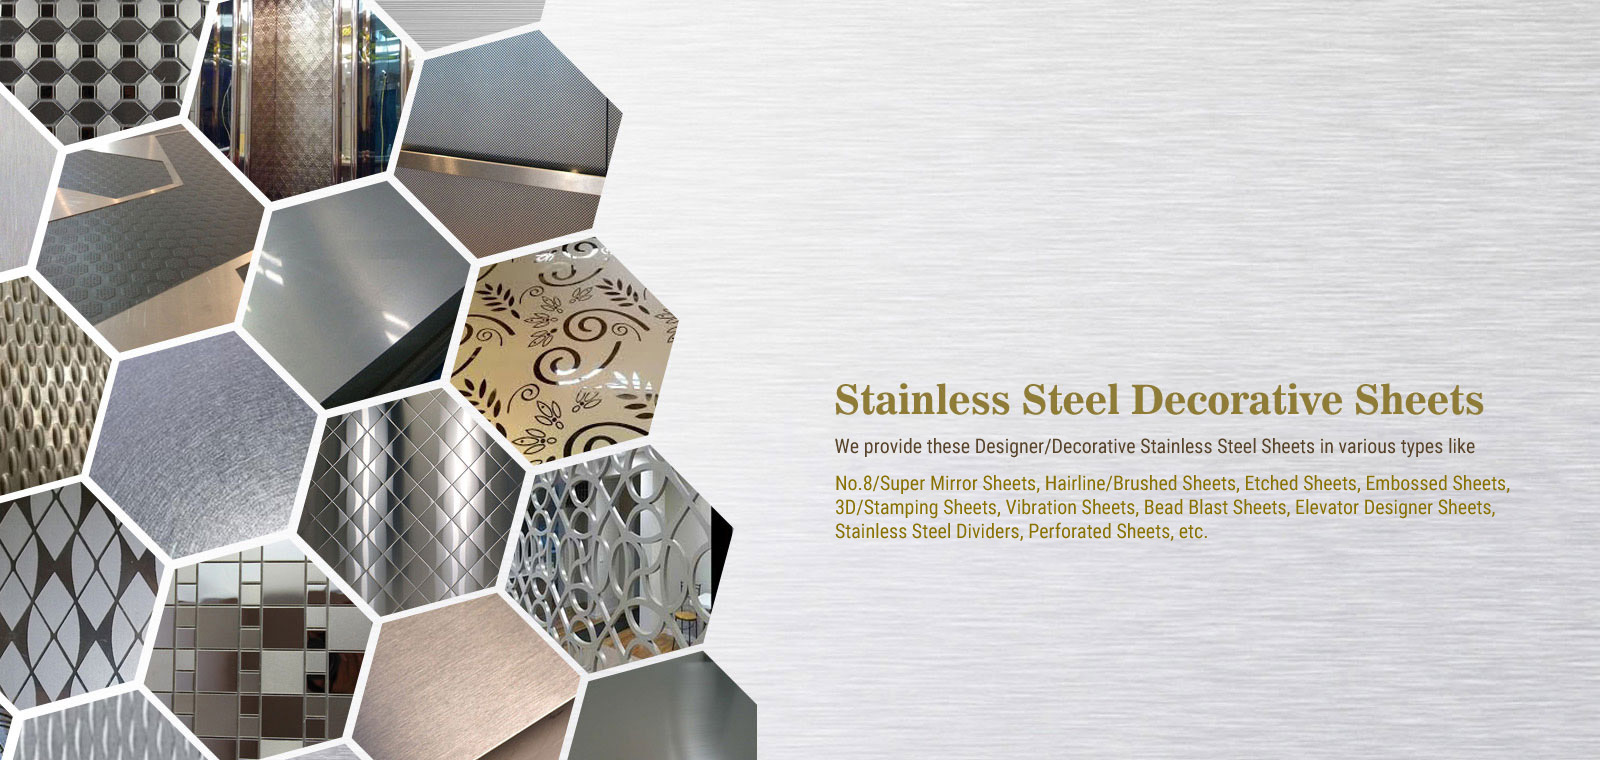 Stainless Steel Decorative Sheets